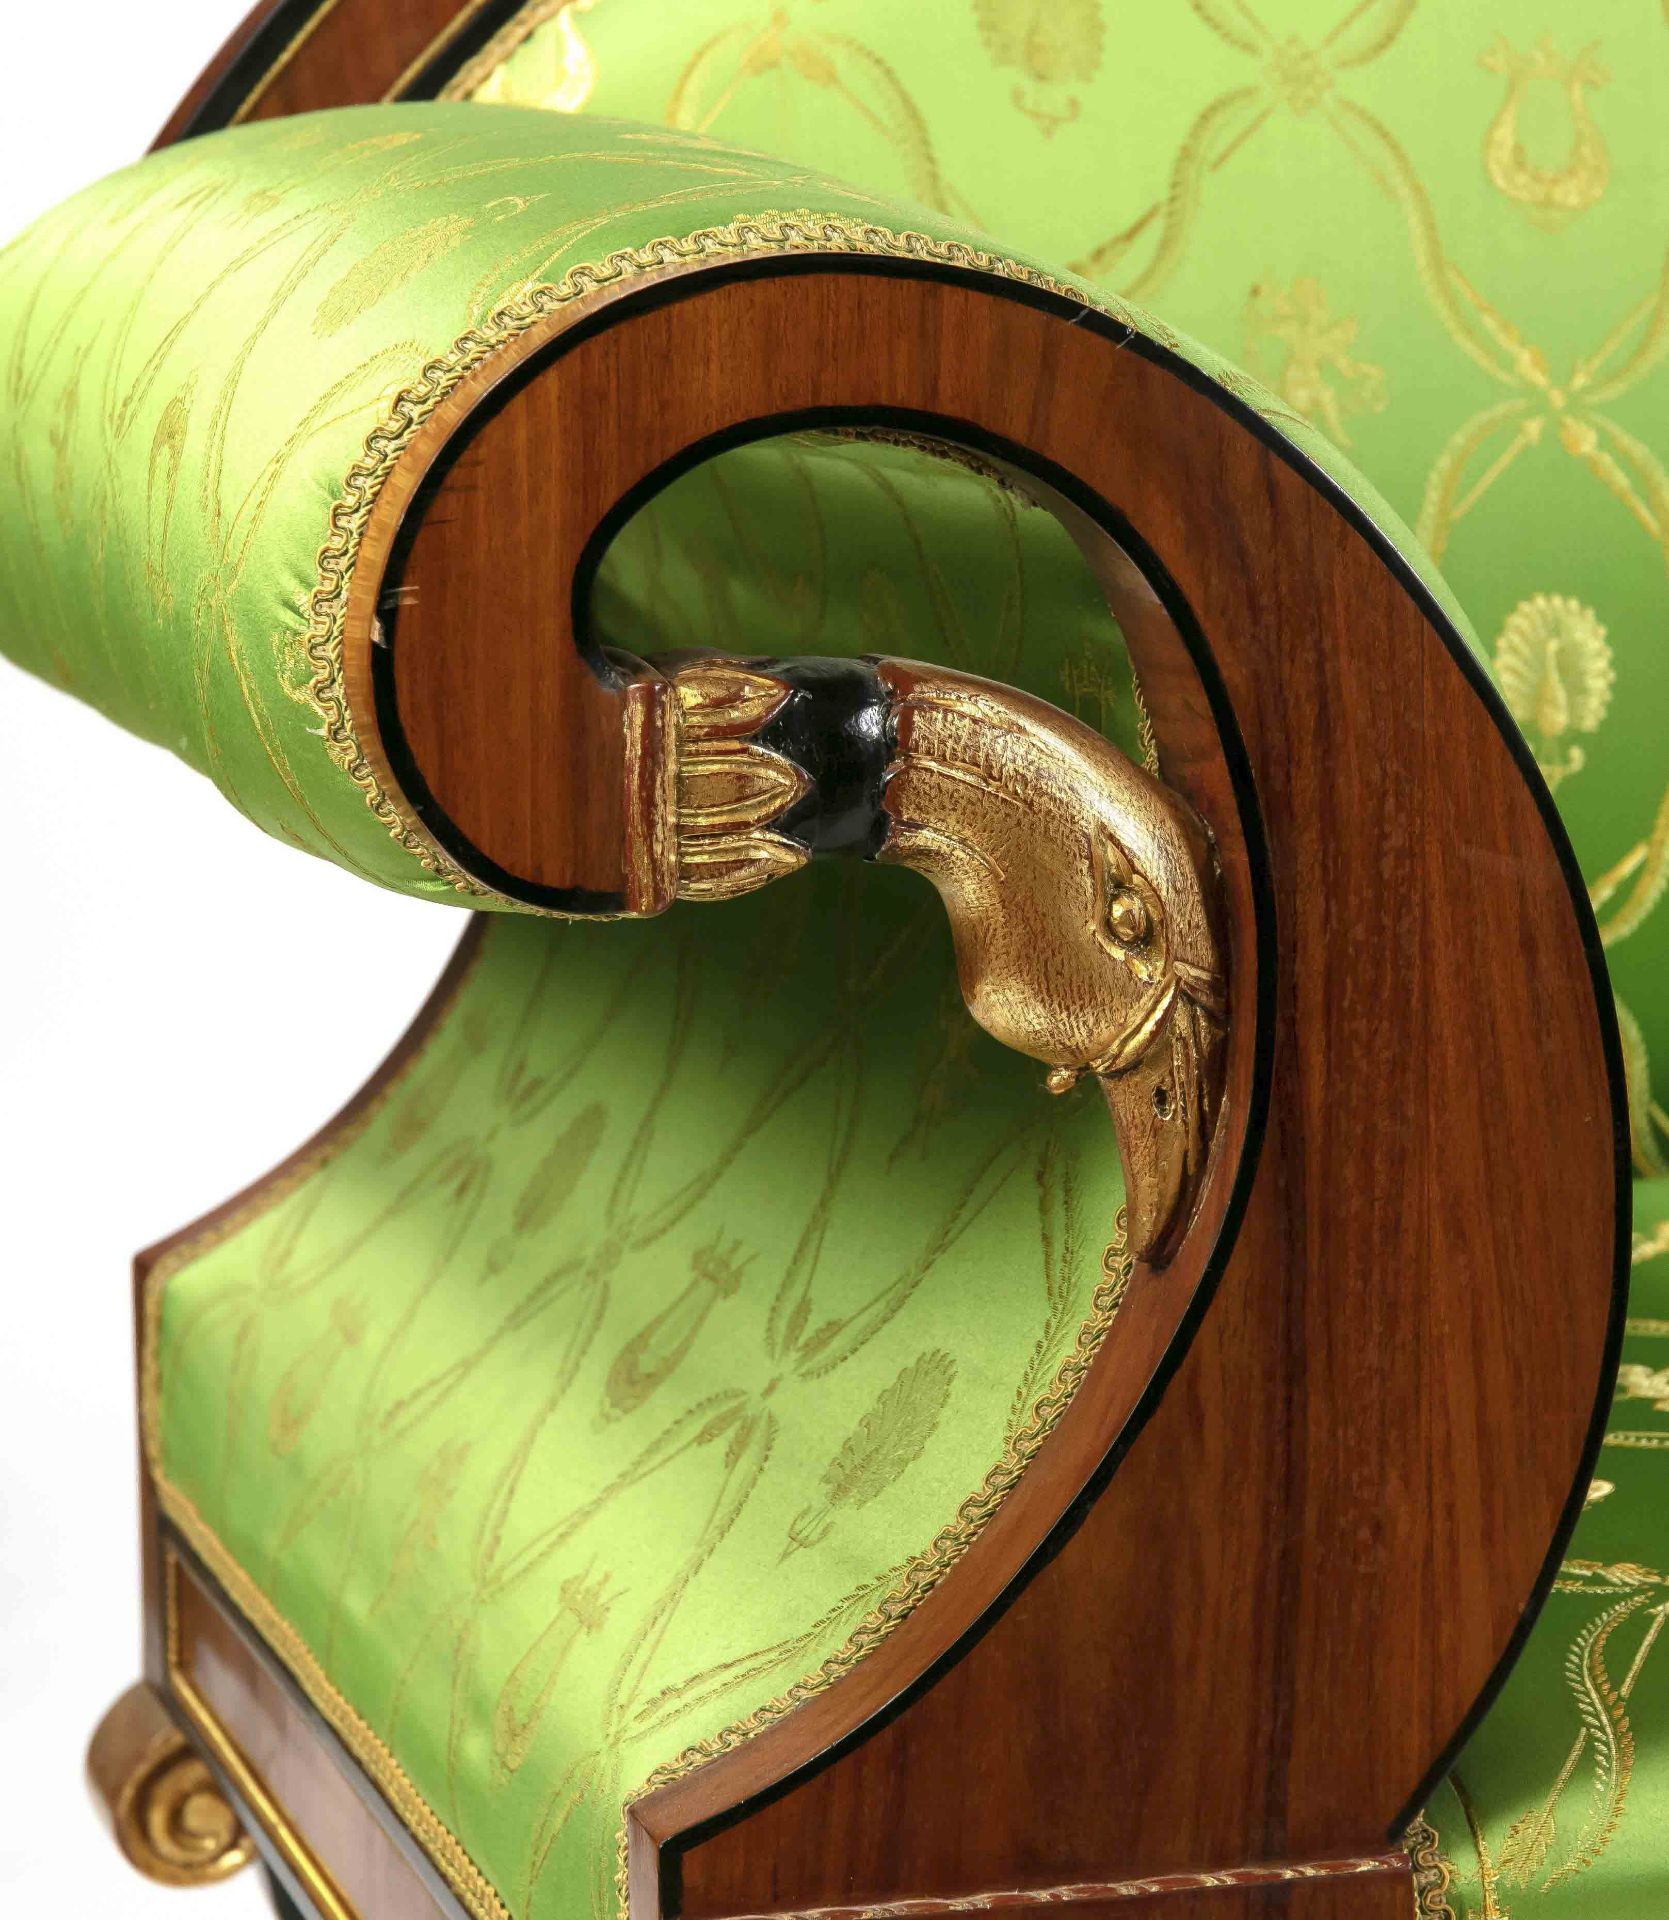 Empire style swan canapé, late 20th c., walnut veneer, carved and gilded swan heads, carved and - Image 4 of 4